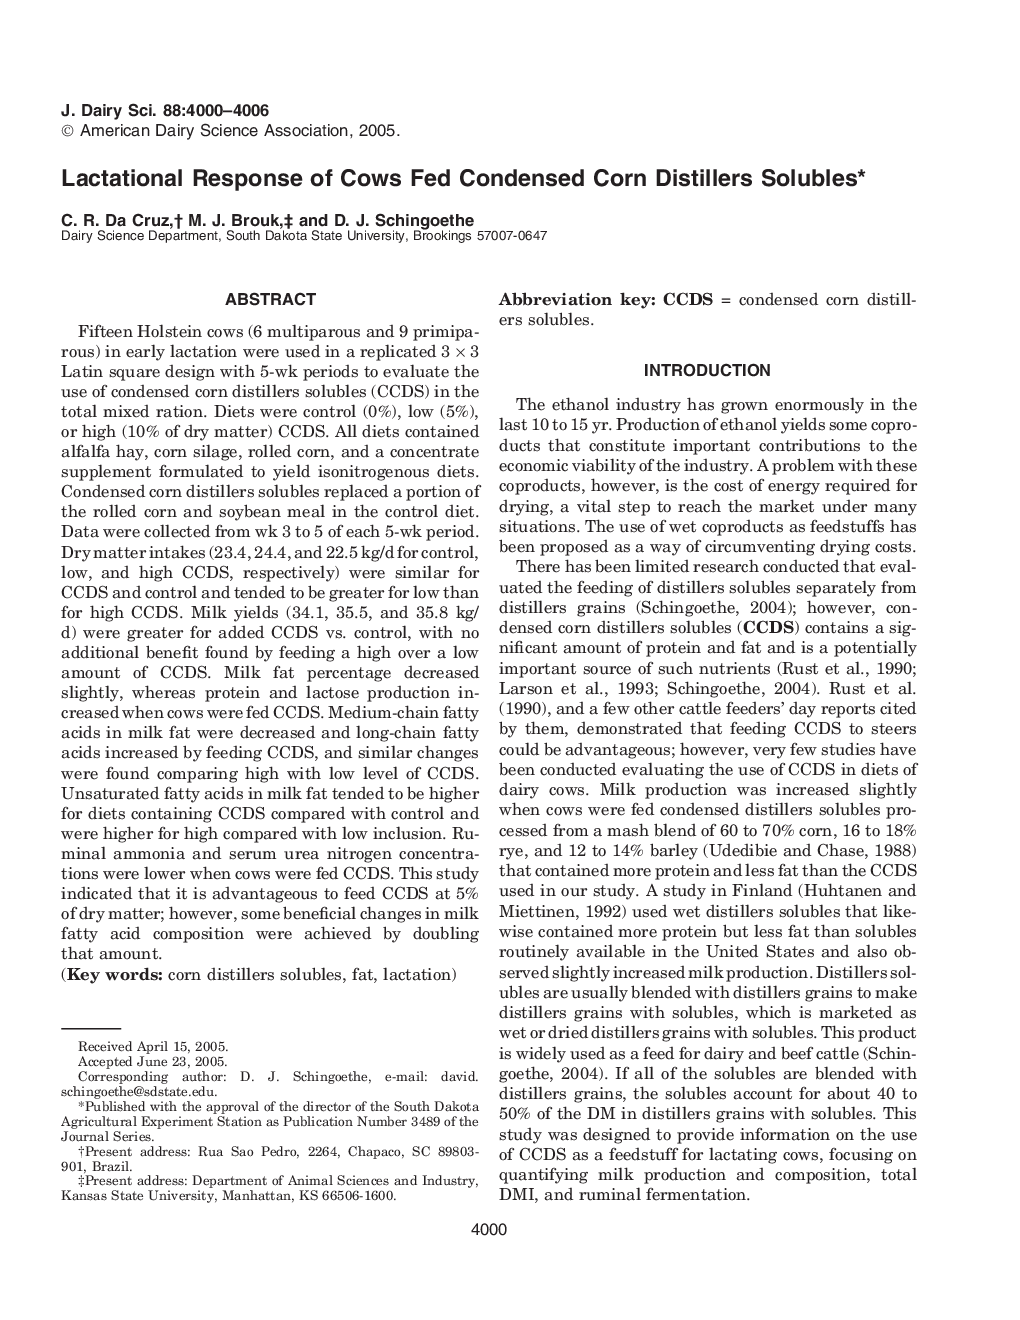 Lactational Response of Cows Fed Condensed Corn Distillers Solubles*